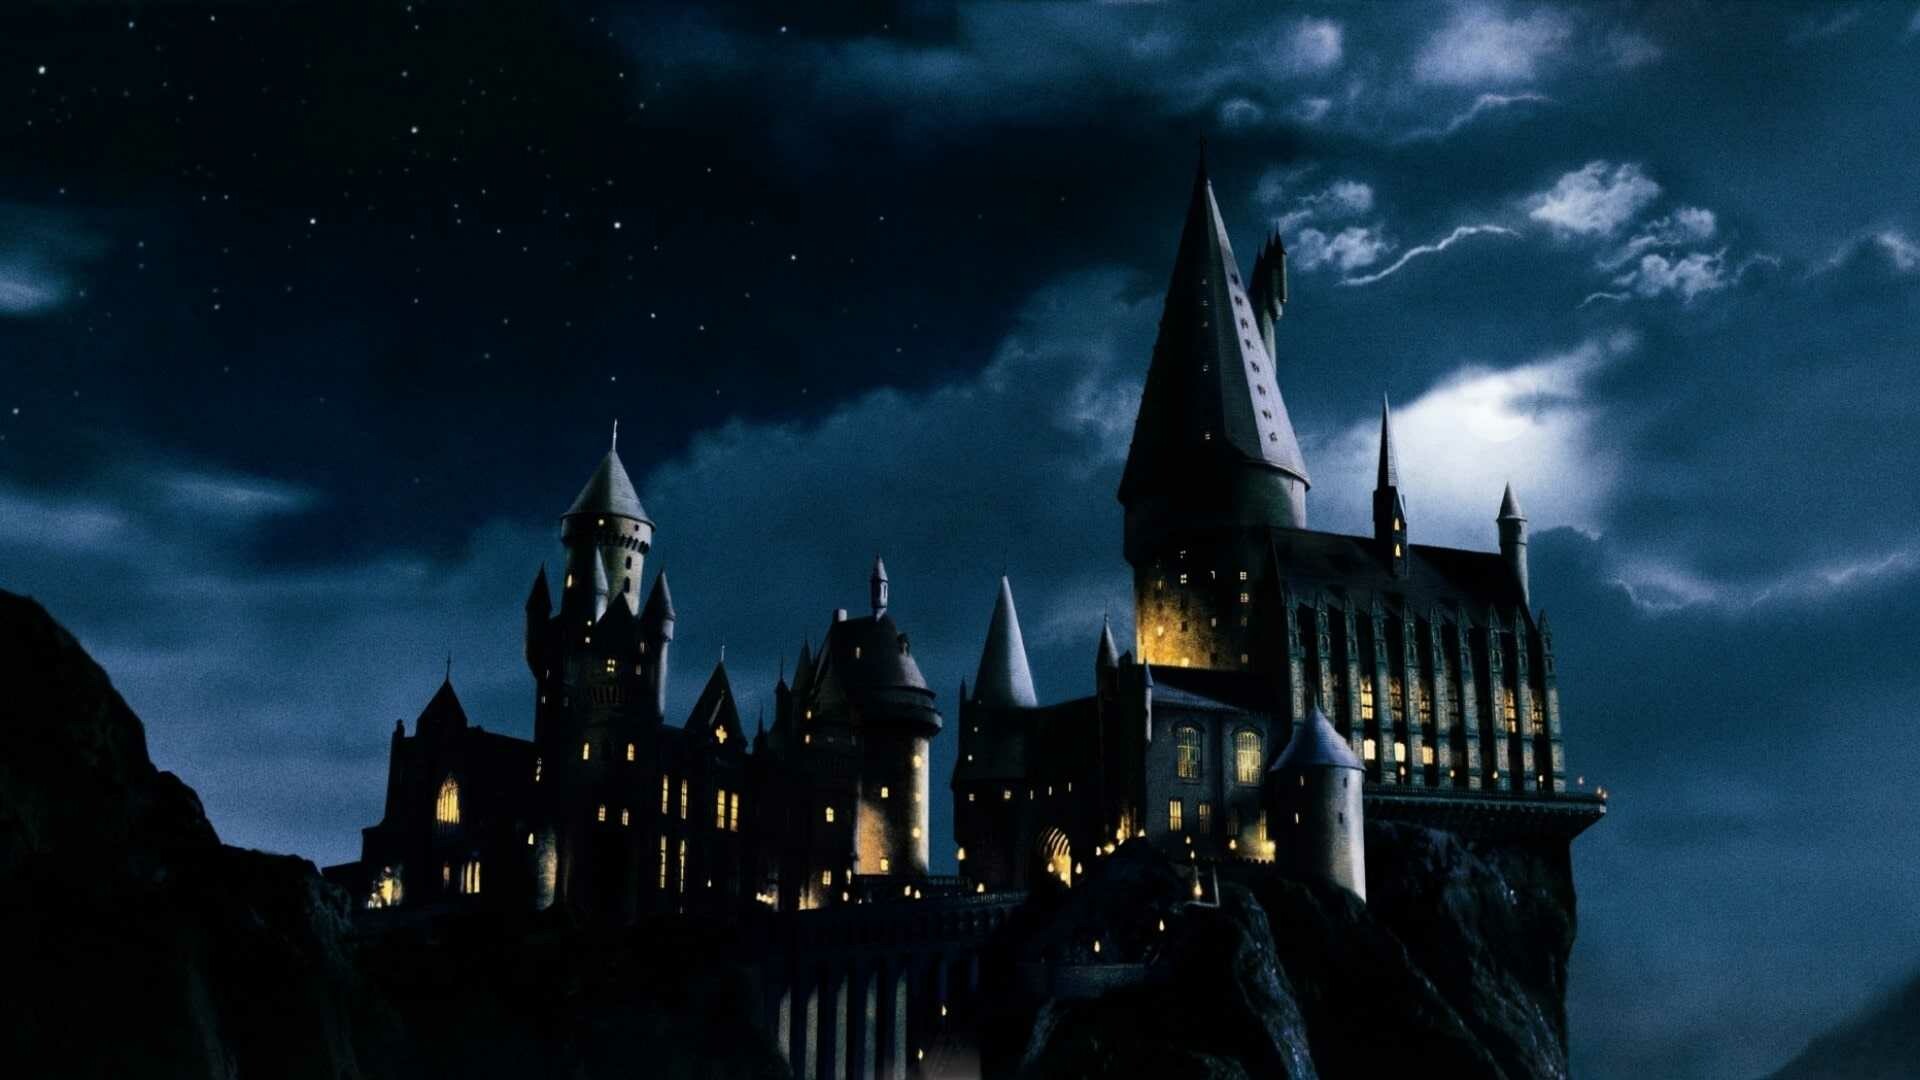 Harry Potter: Hogwarts School of Witchcraft and Wizardry, A Scottish wizarding school located in the Scottish Highlands. 1920x1080 Full HD Wallpaper.